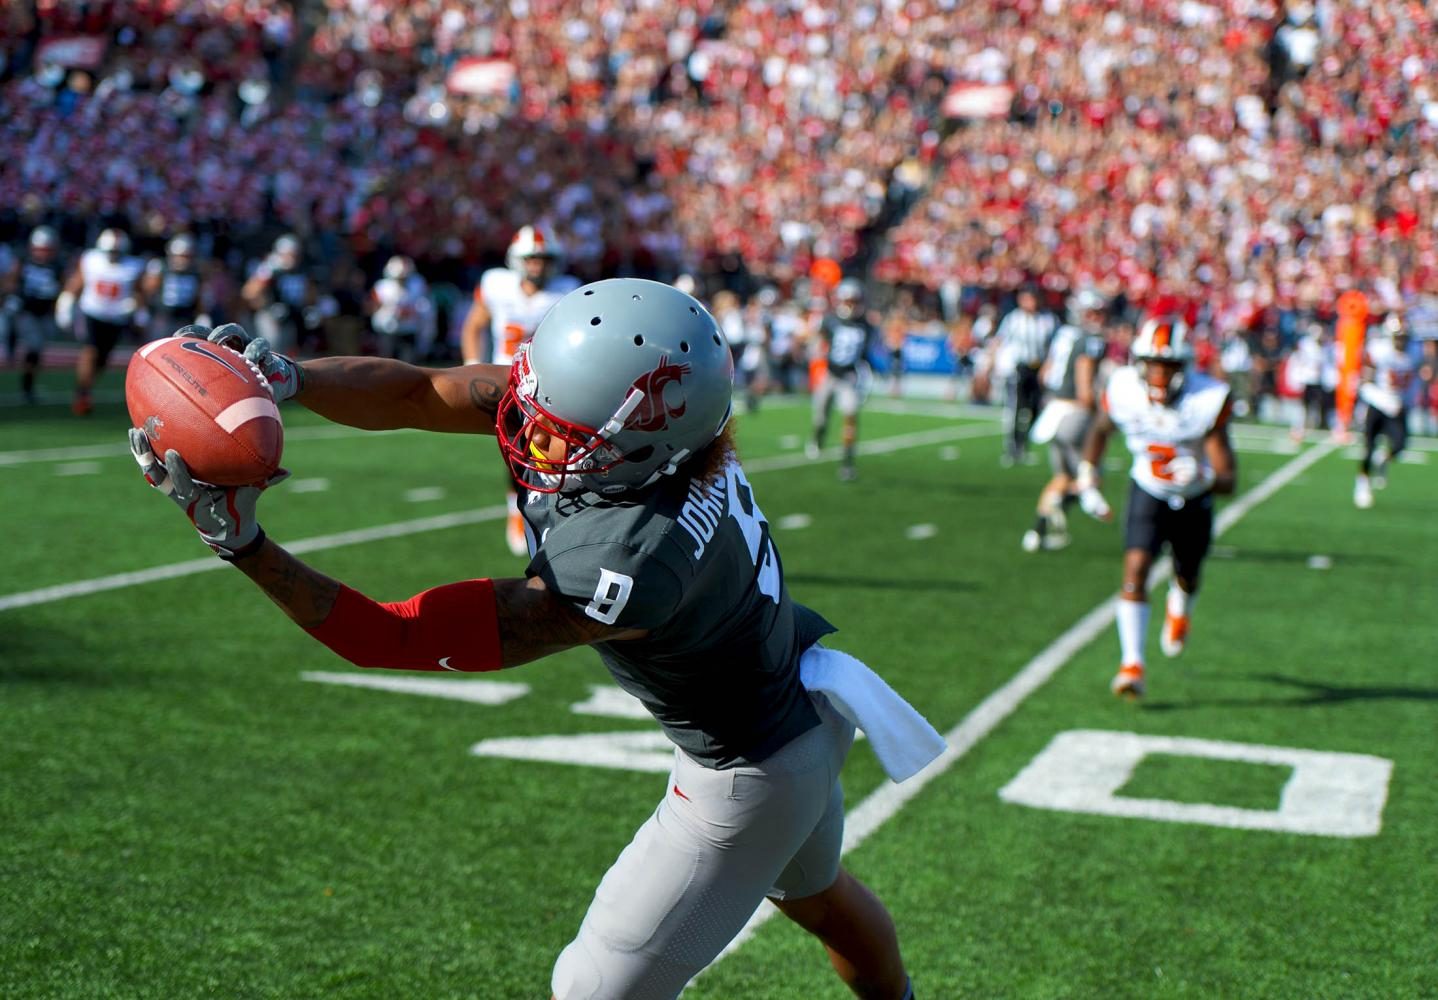 Sophomore wide receiver Isaiah Johnson-Mack catches a pass on the sidelines for a gain of yards against Oregon State on Saturday at Martin Stadium.